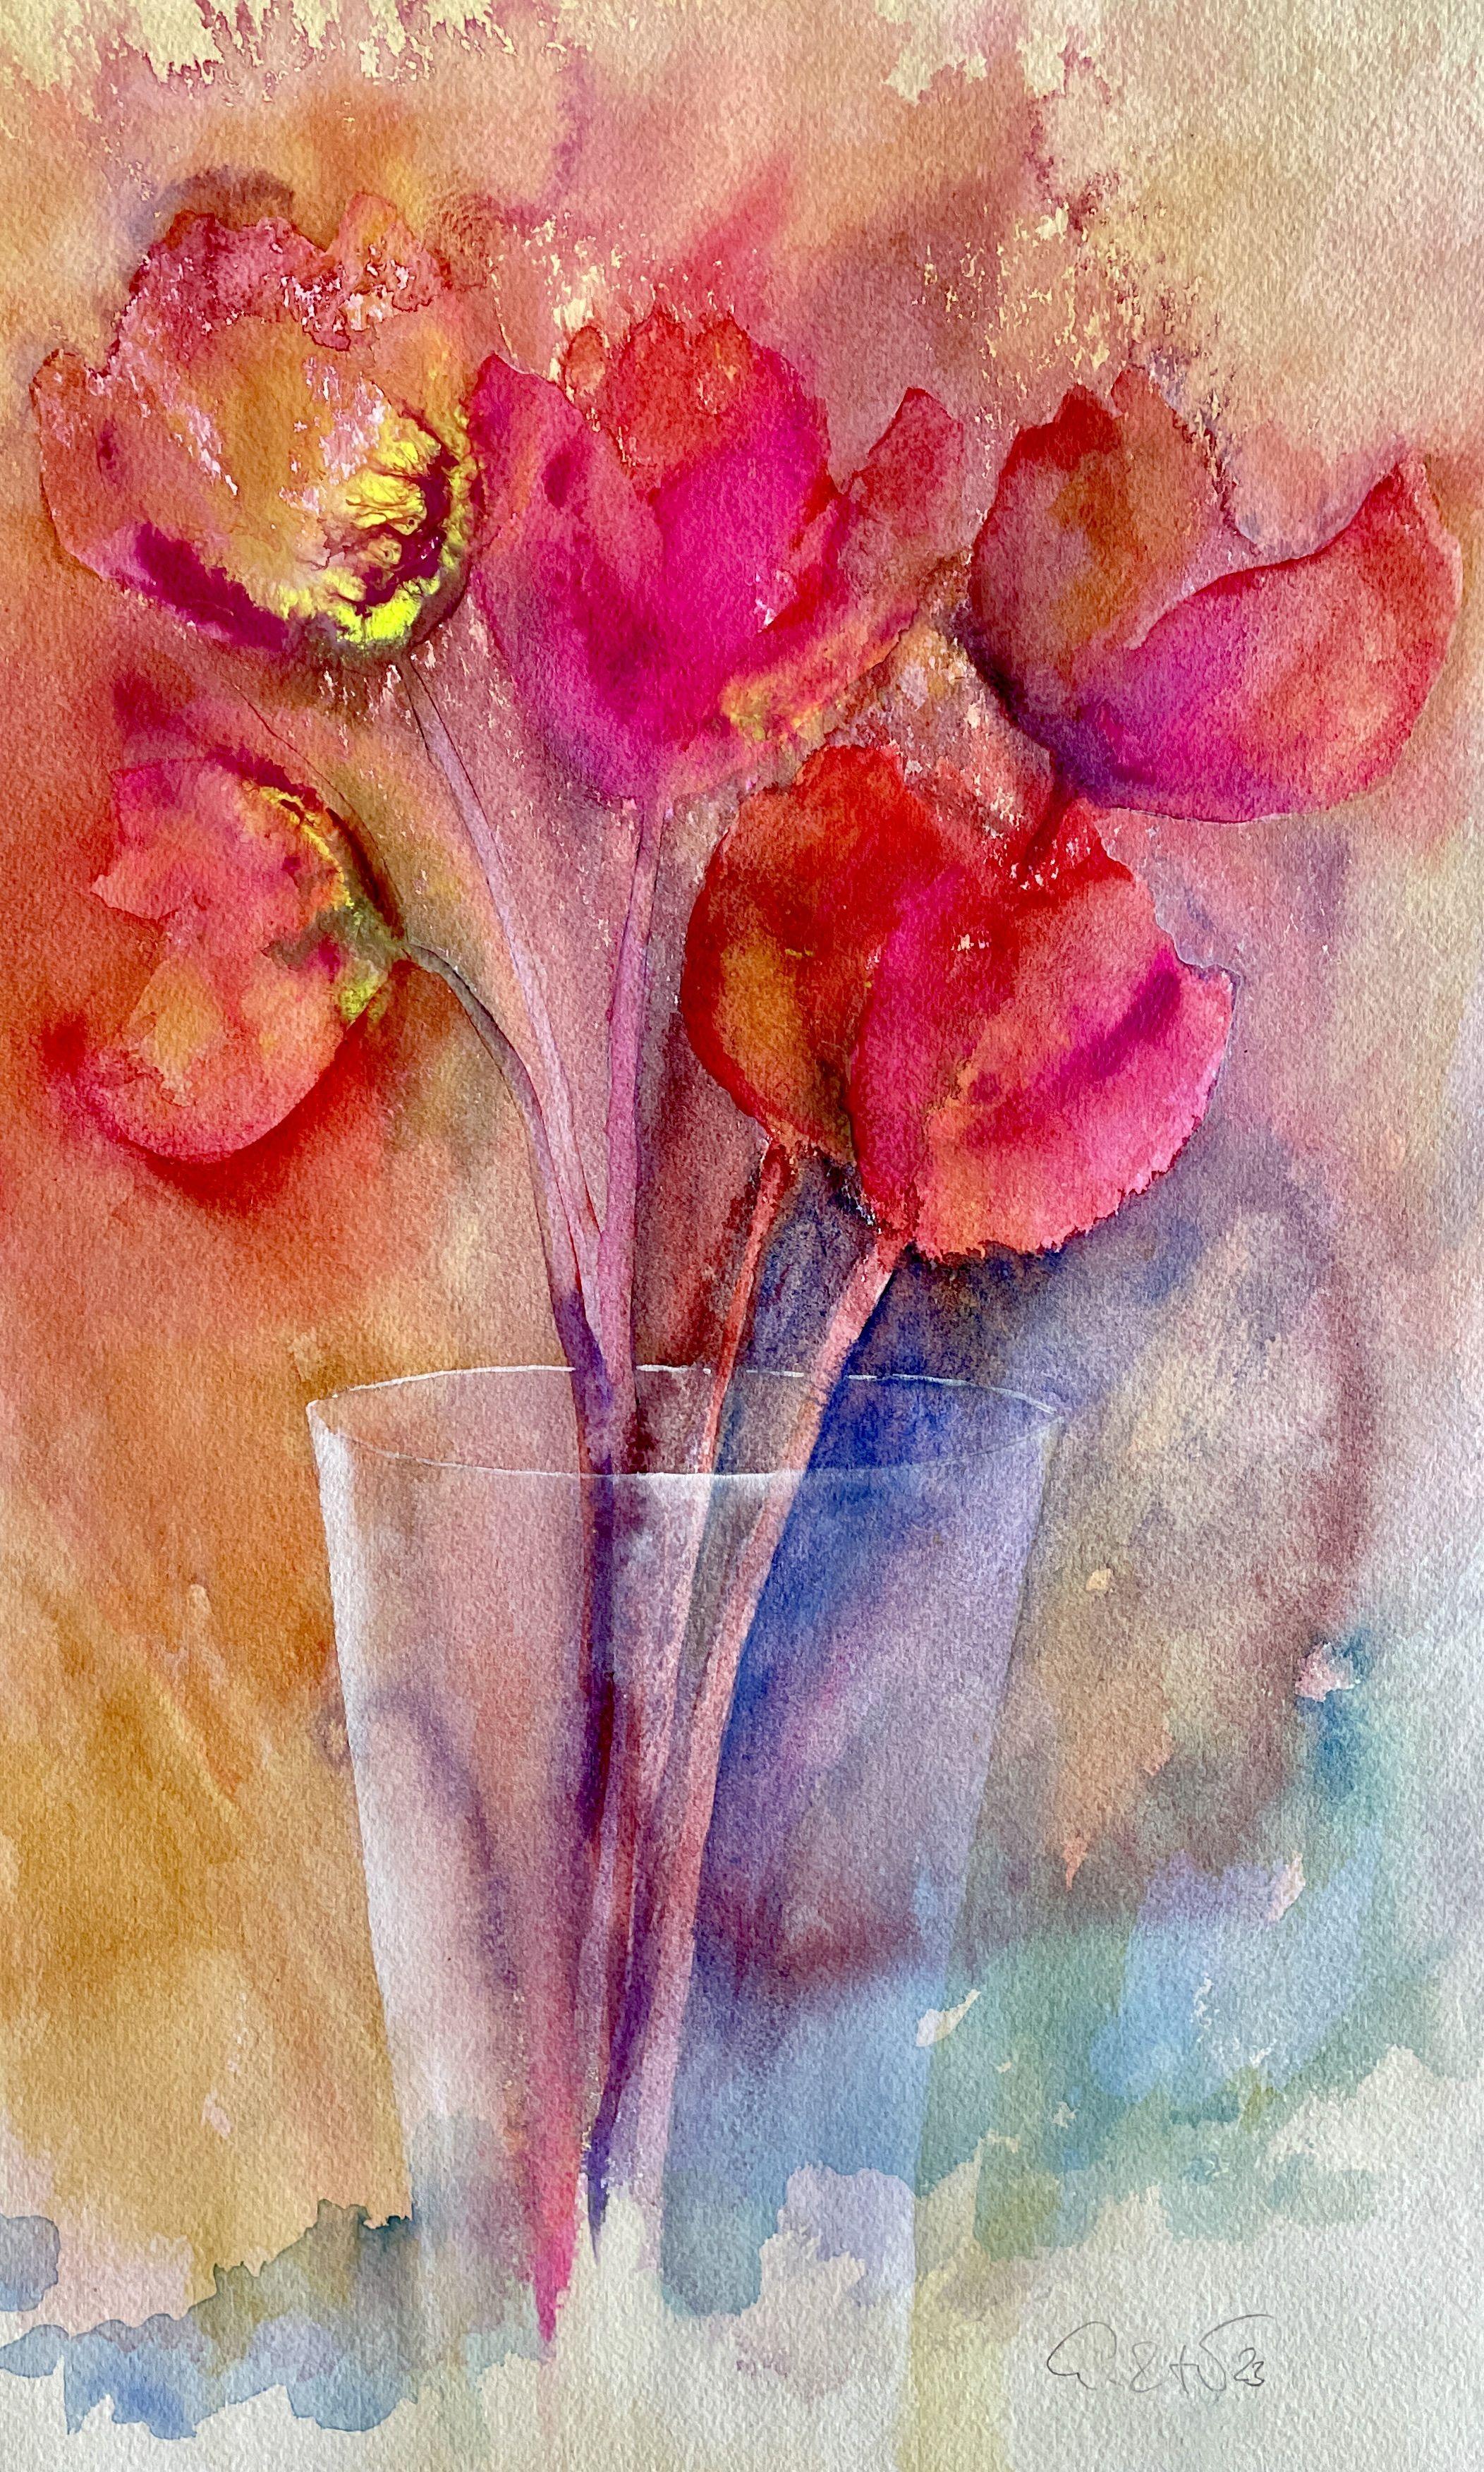 Tulip Love, Painting, Watercolor on Paper - Art by Gesa Reuter